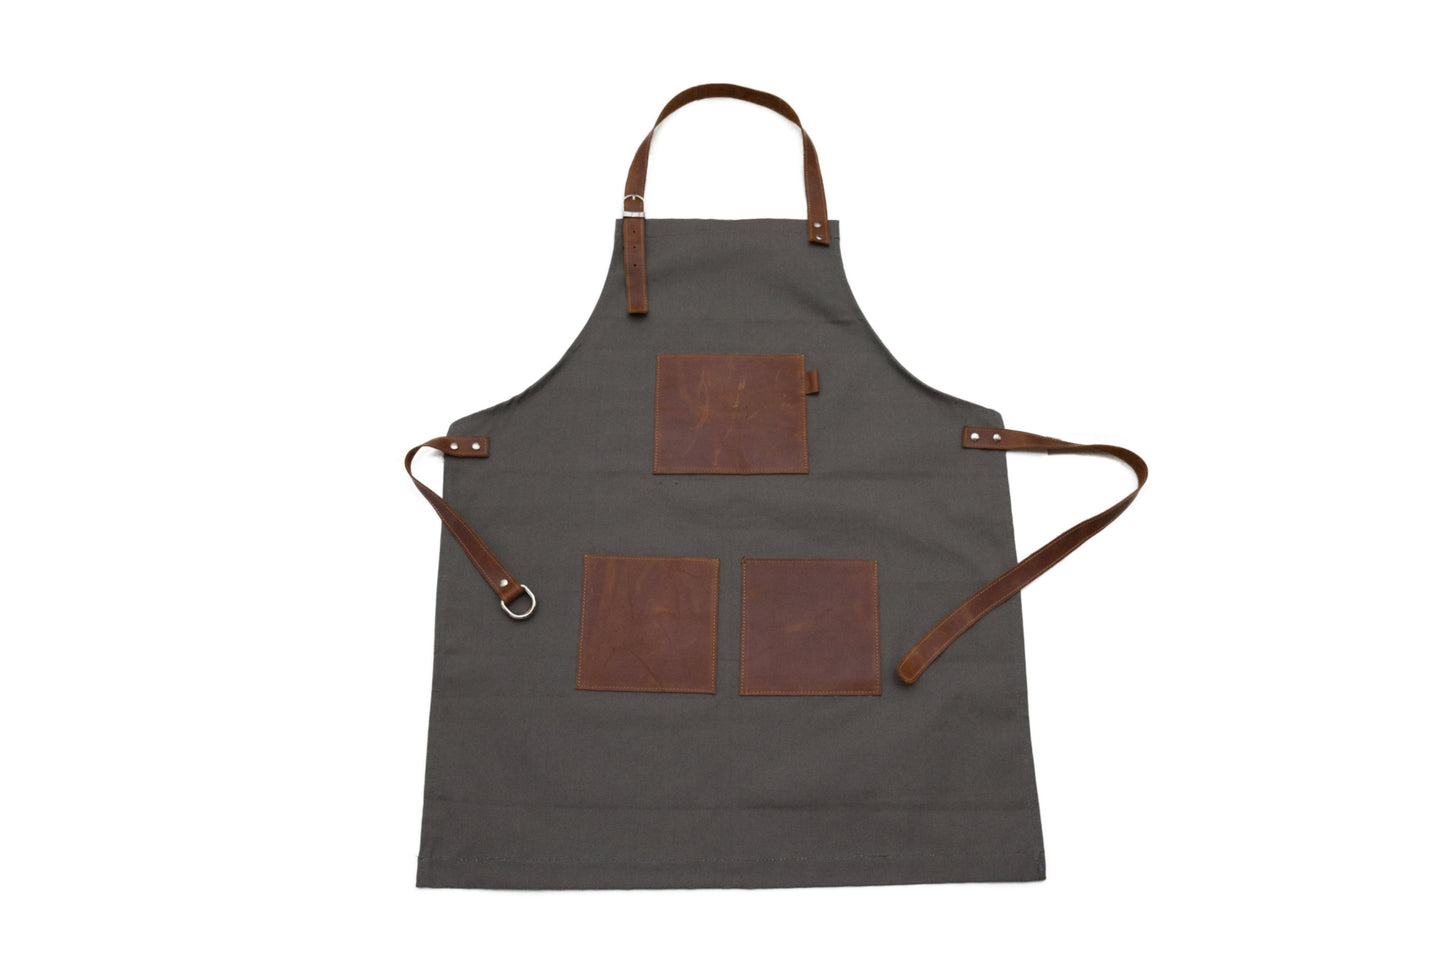 The Apron by  Adelphi.